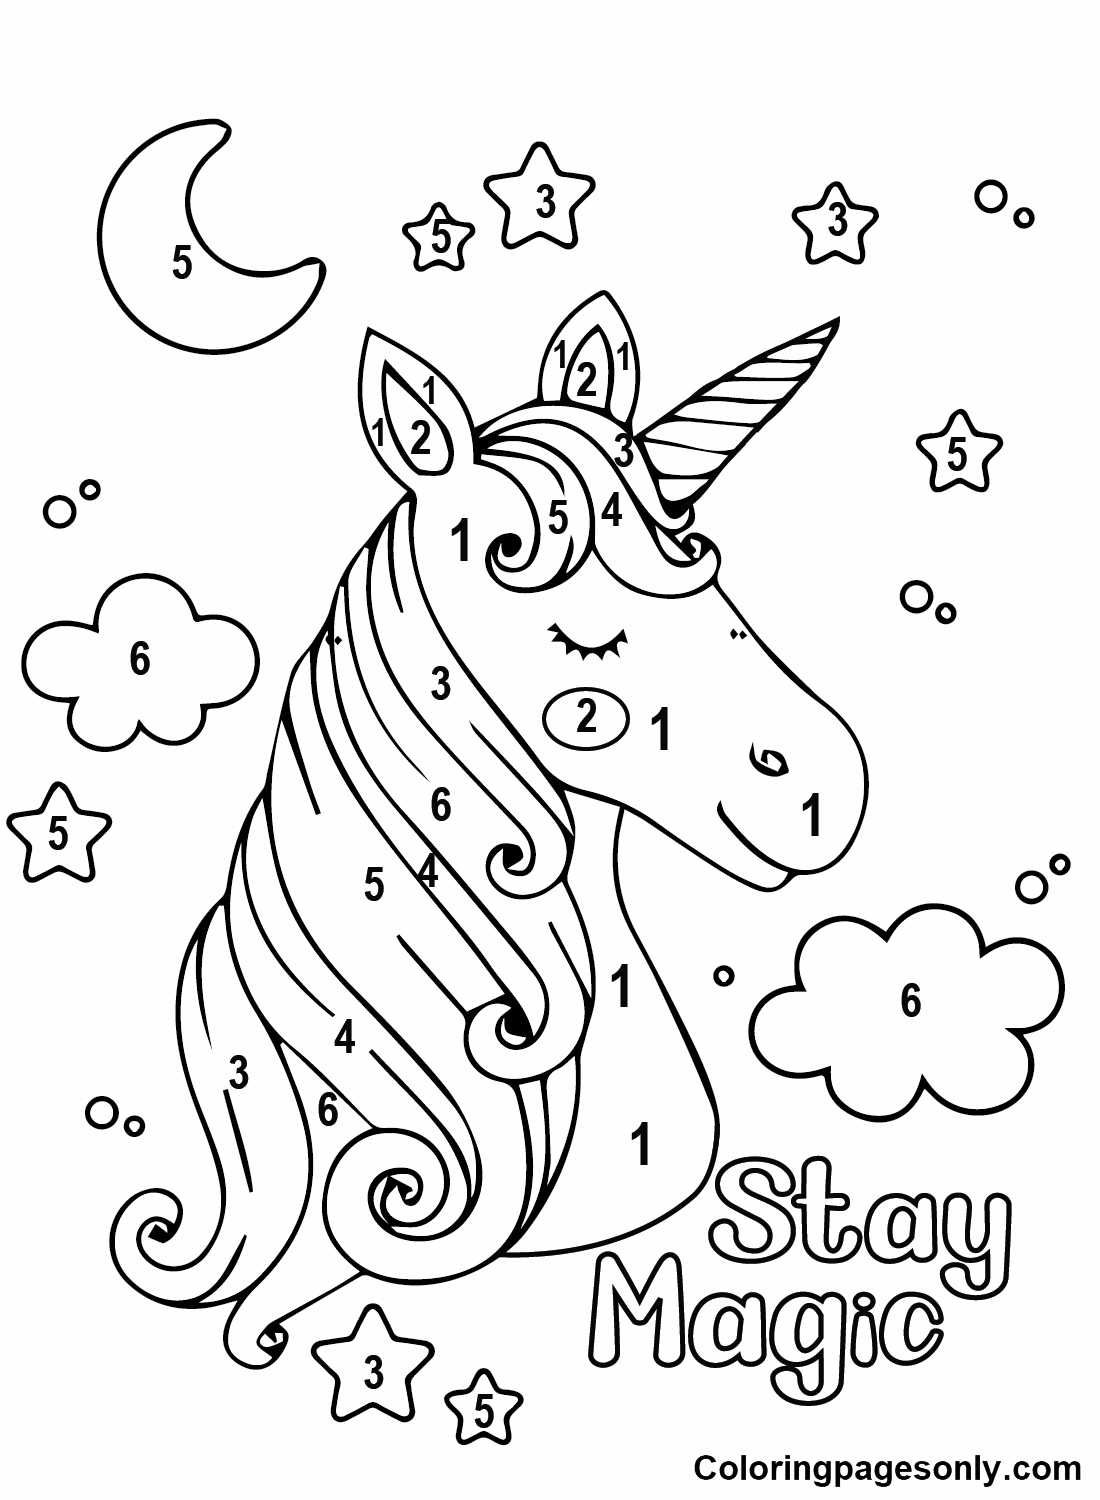 Unicorn color by number coloring pages printable for free download